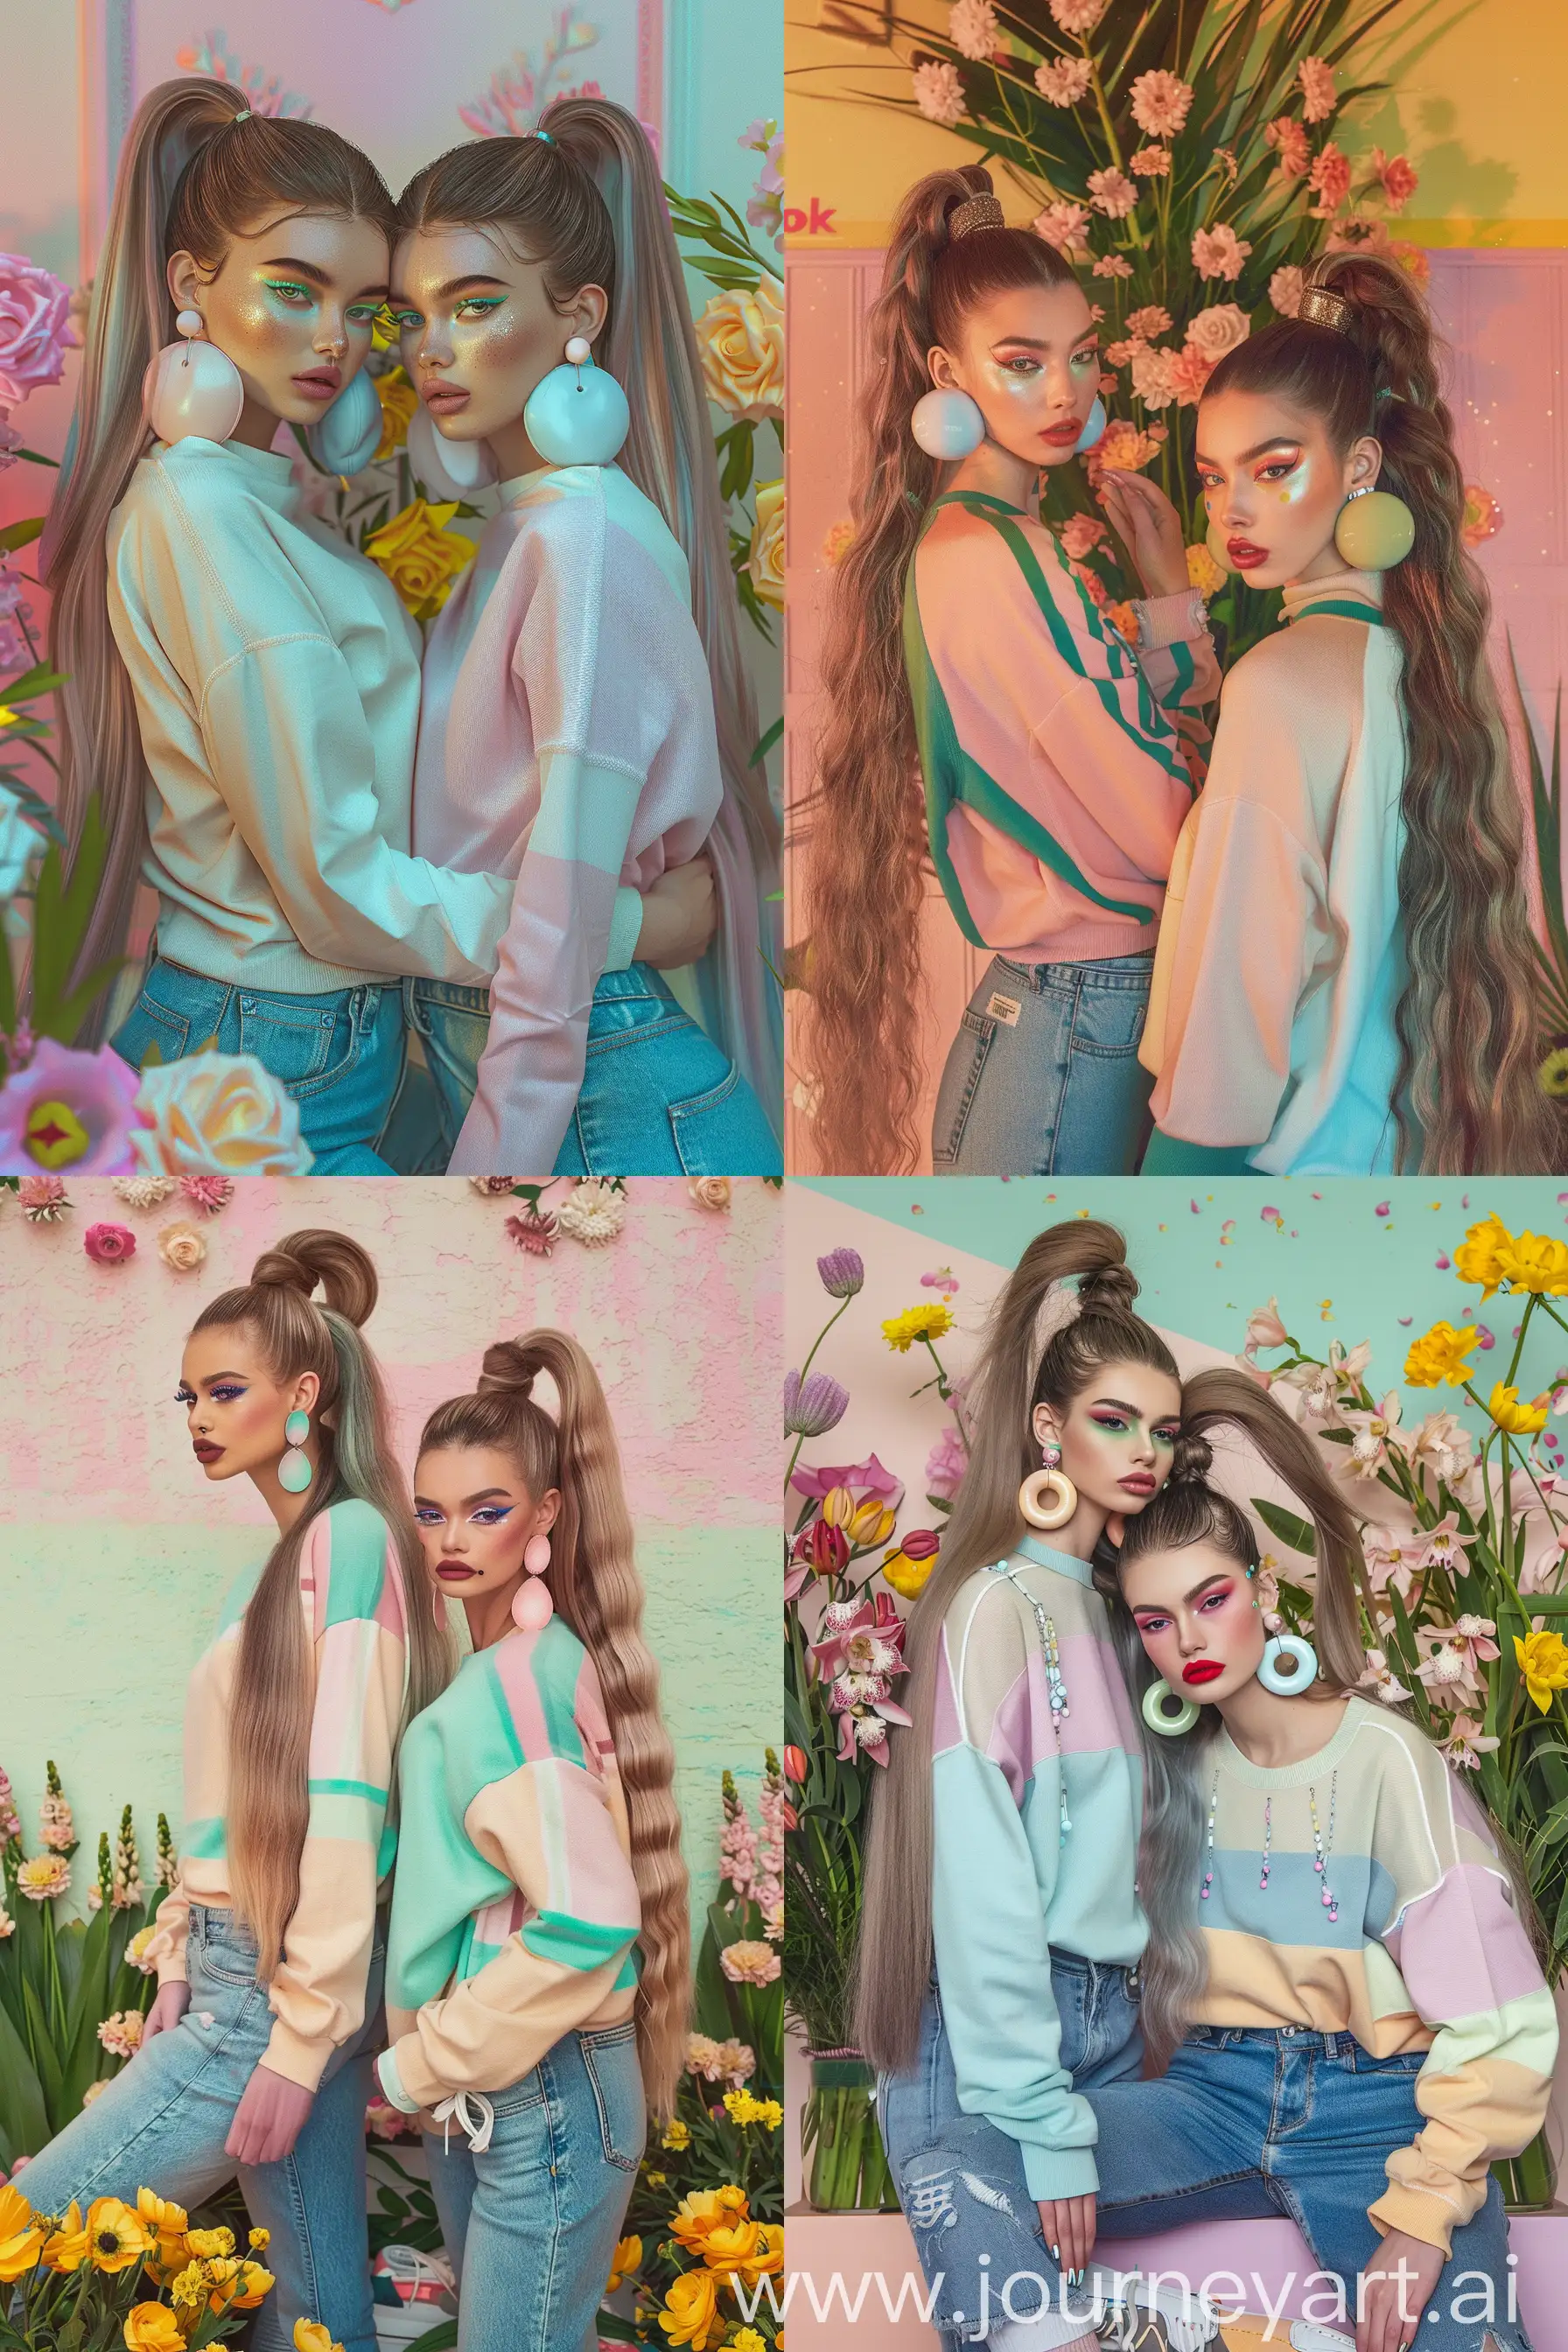 Fashionable-Duo-with-Vibrant-Pastels-Stylish-LongHaired-Women-in-Pastel-Attire